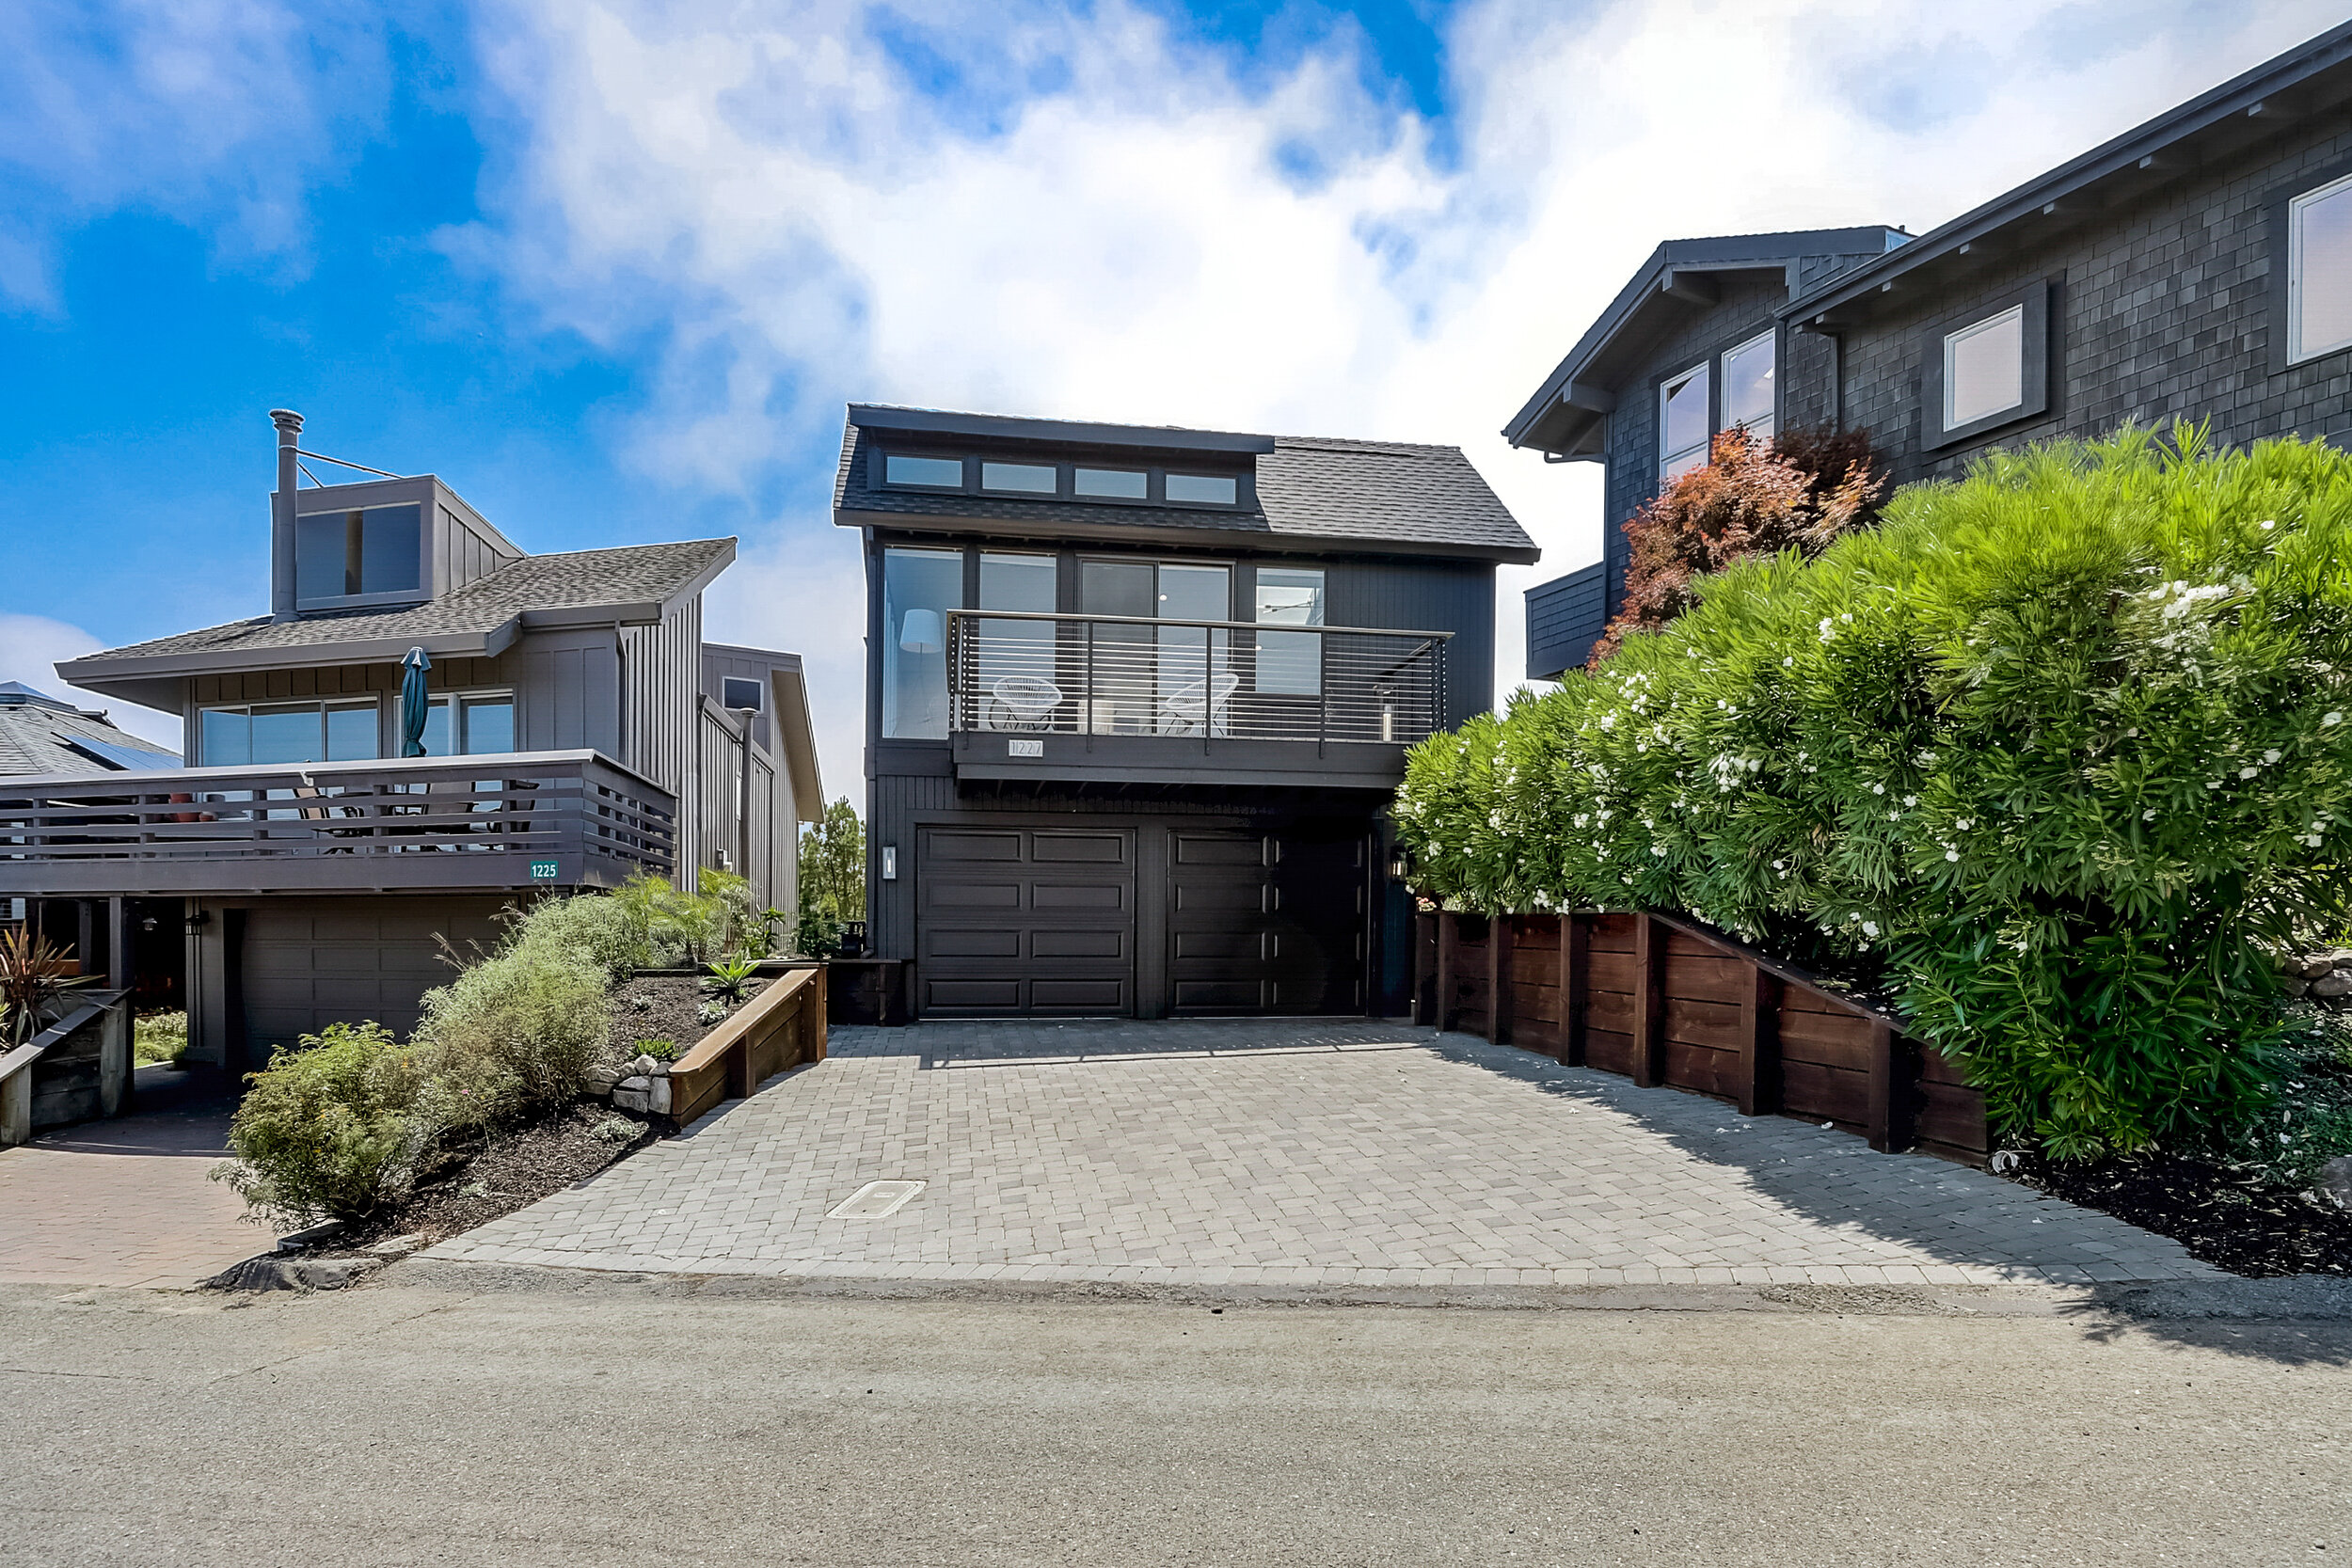 1227 Waterview Drive Listed by Allie Fornesi Top Mill Valley Realtor-53.jpg